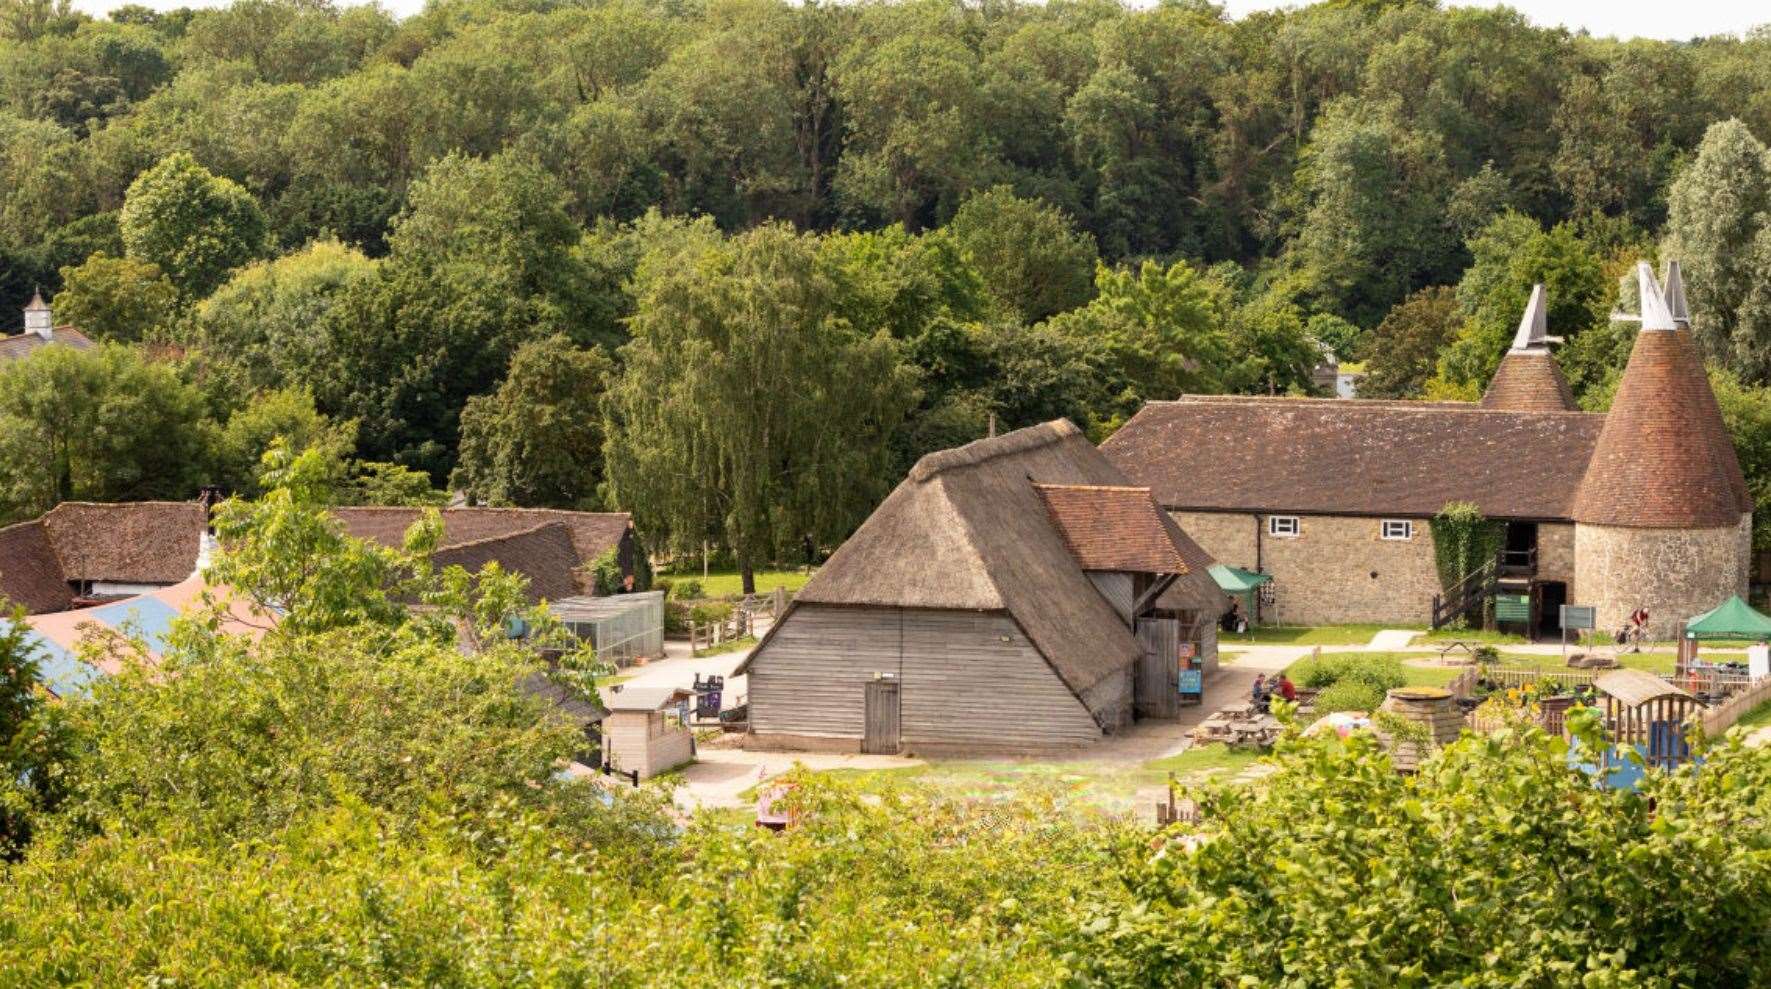 Kent Life Heritage Farm Park hopes to raise £300,000 to repair its thatched roof. Picture: Kent Life